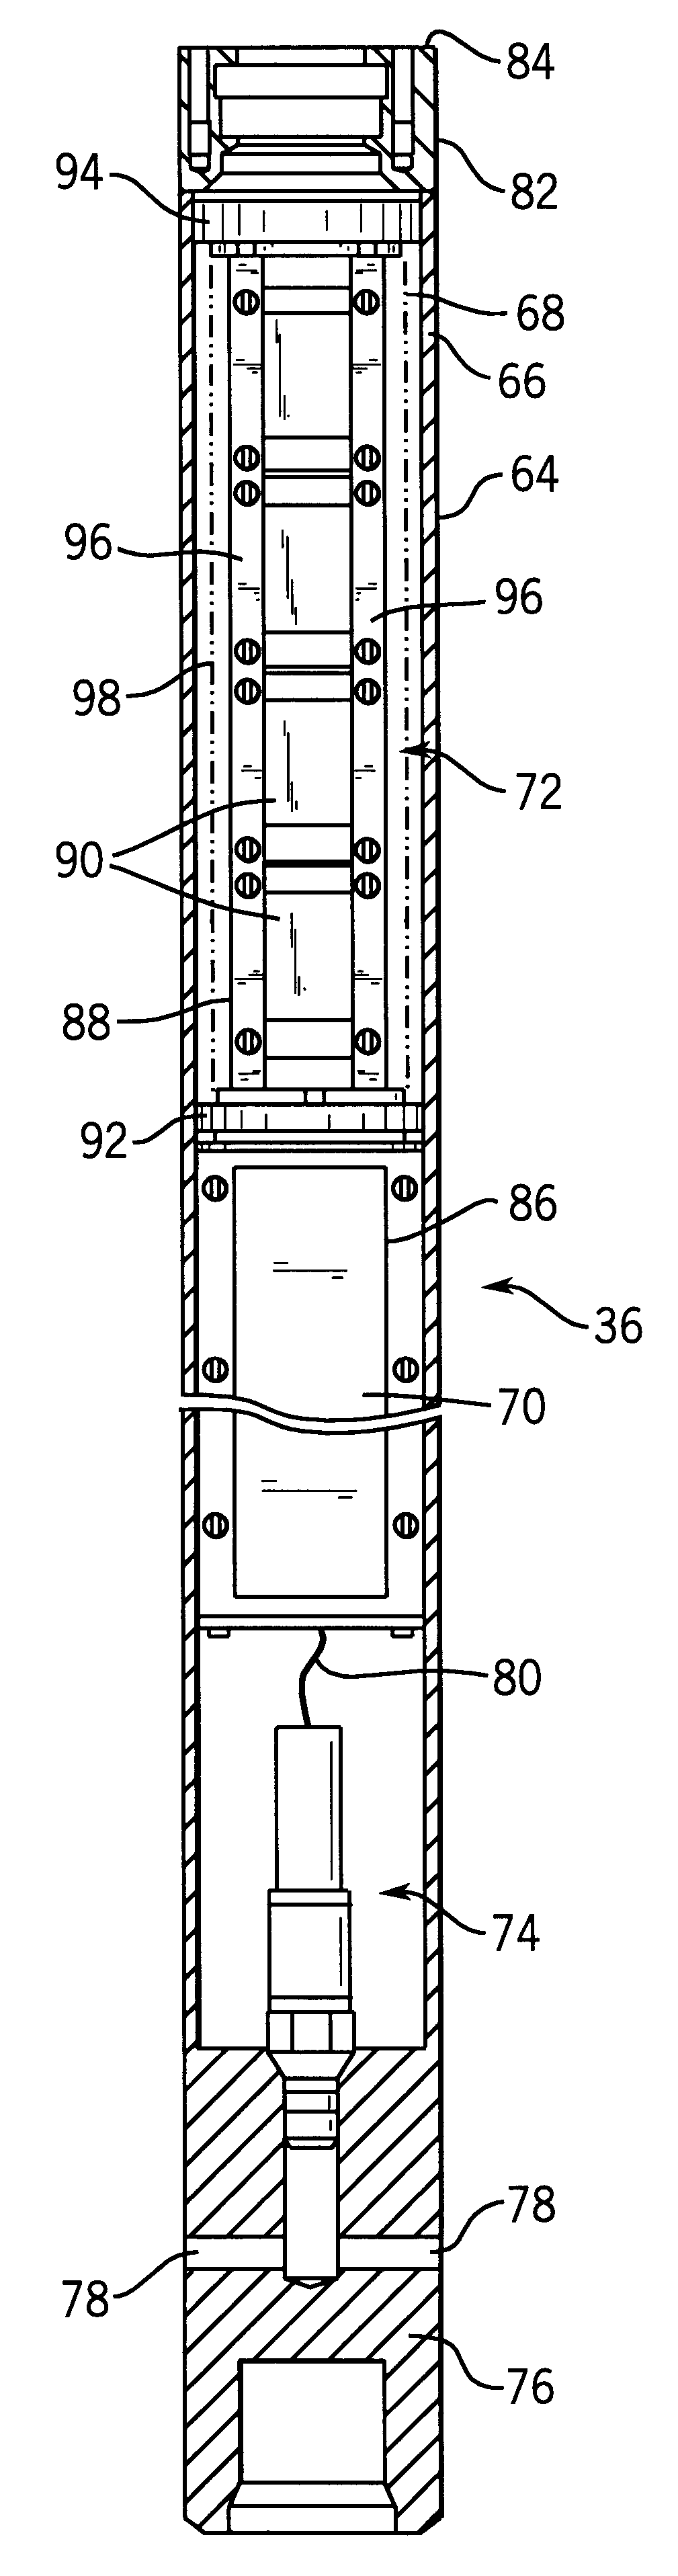 Inductor system for a submersible pumping system